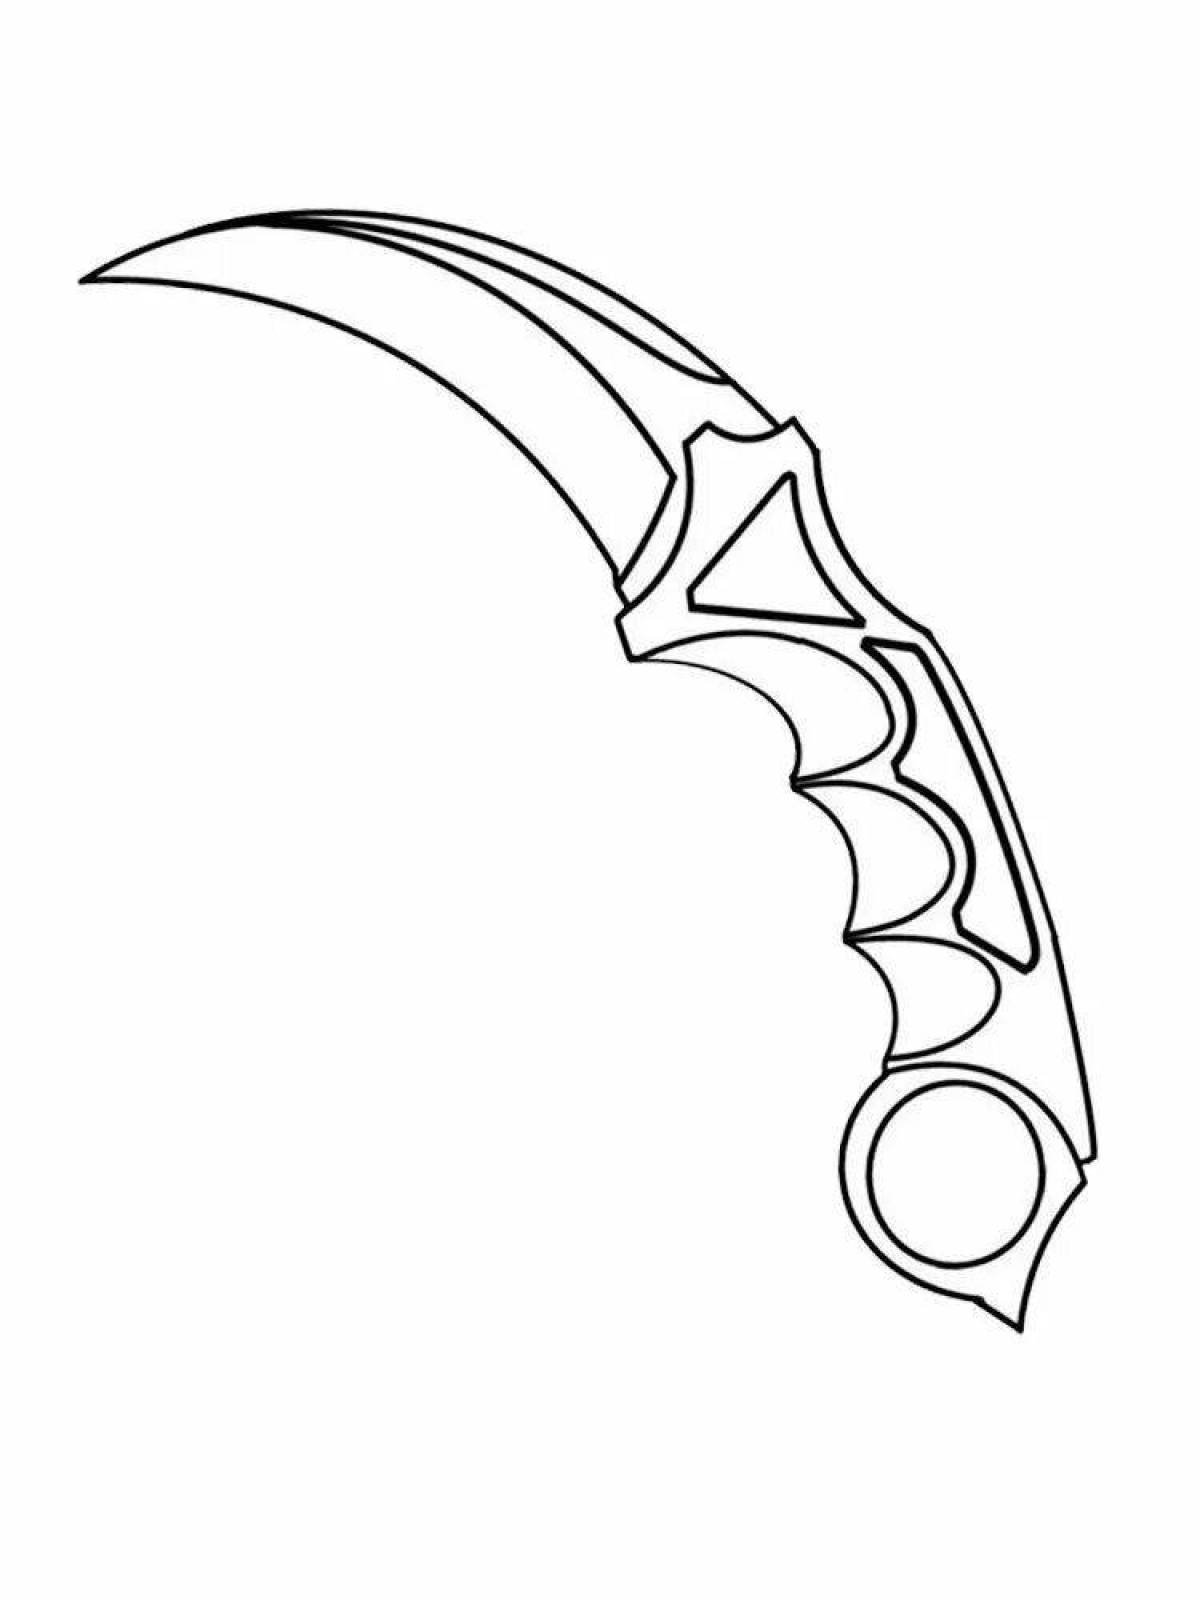 Brilliant tanto from standoff 2 coloring page